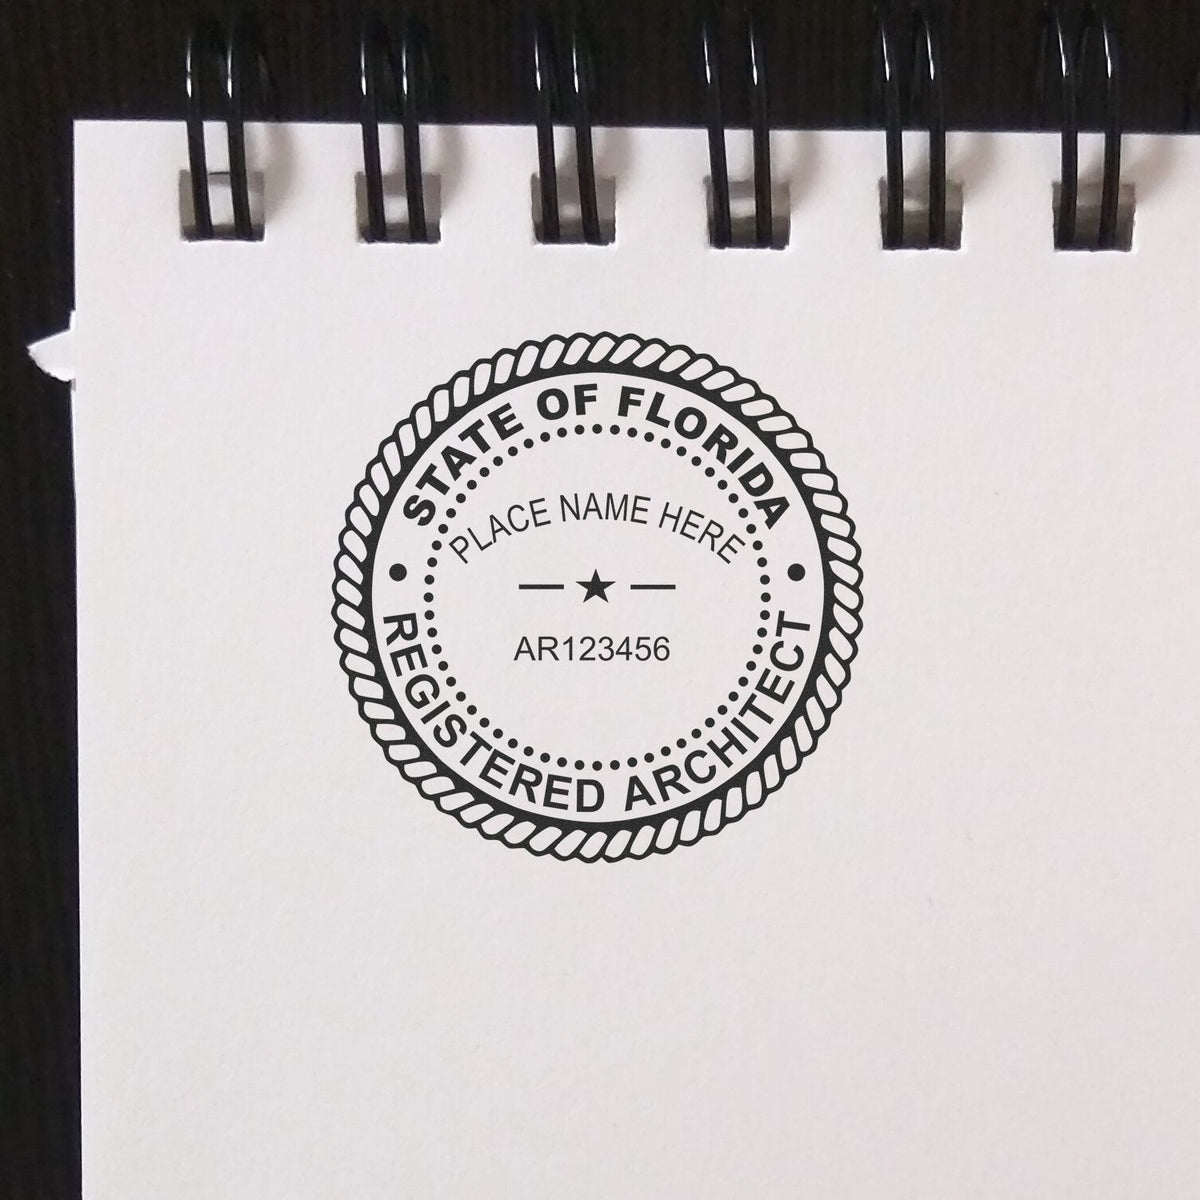 The Slim Pre-Inked Florida Architect Seal Stamp stamp impression comes to life with a crisp, detailed photo on paper - showcasing true professional quality.